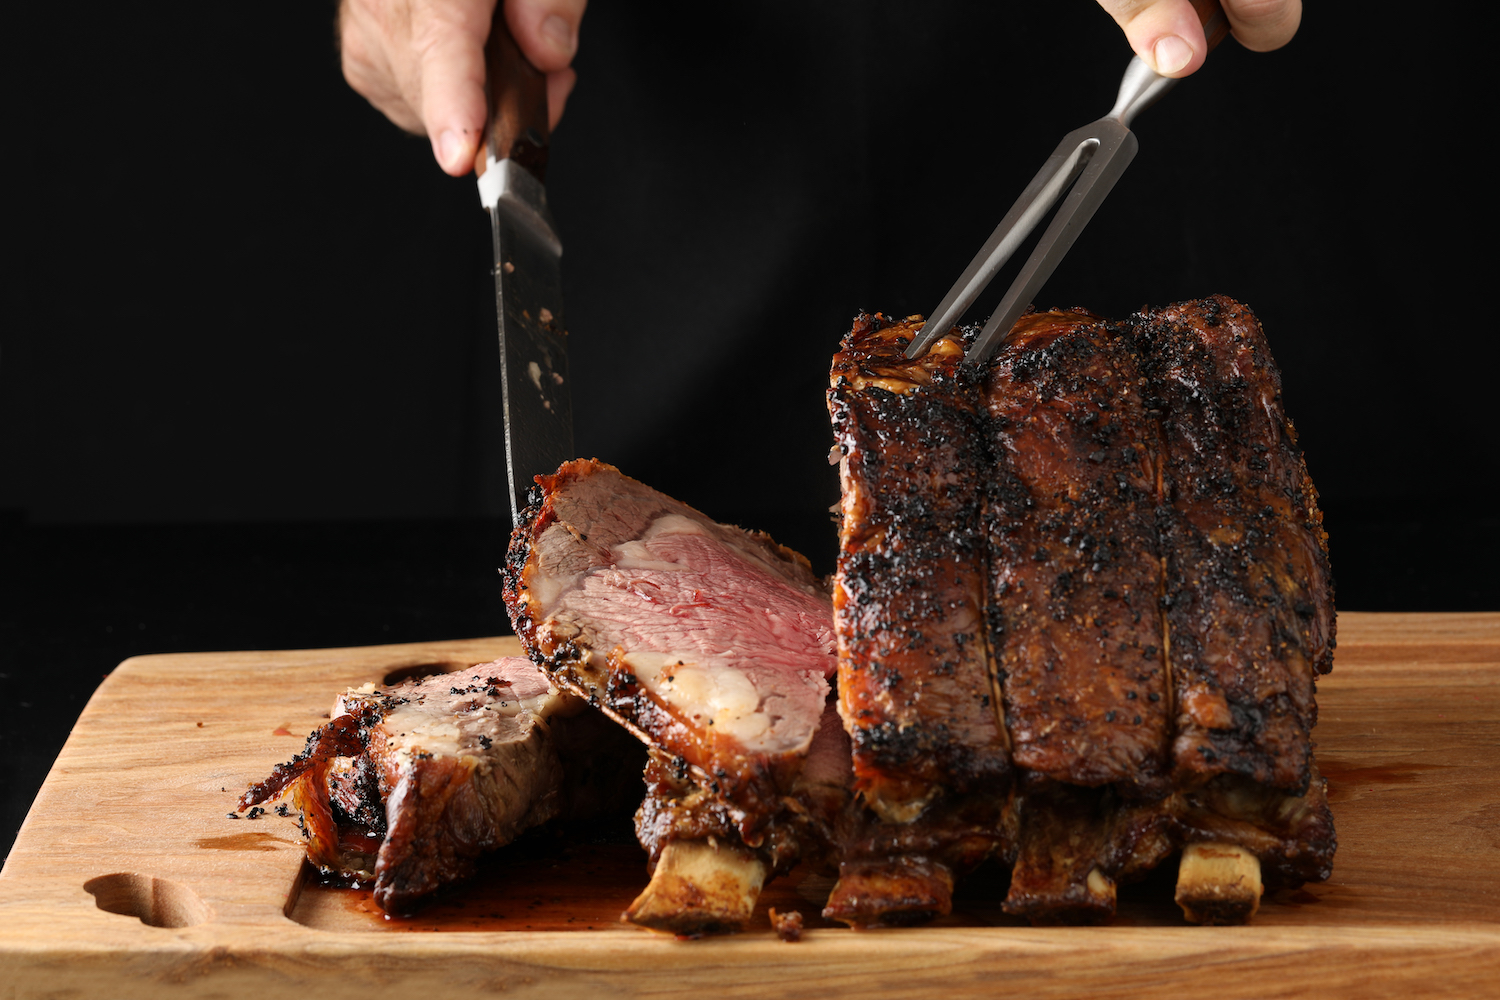 A close up horizontal photograph of a chefs hands carving a prime rib on a wooden carving board. Isolated on black